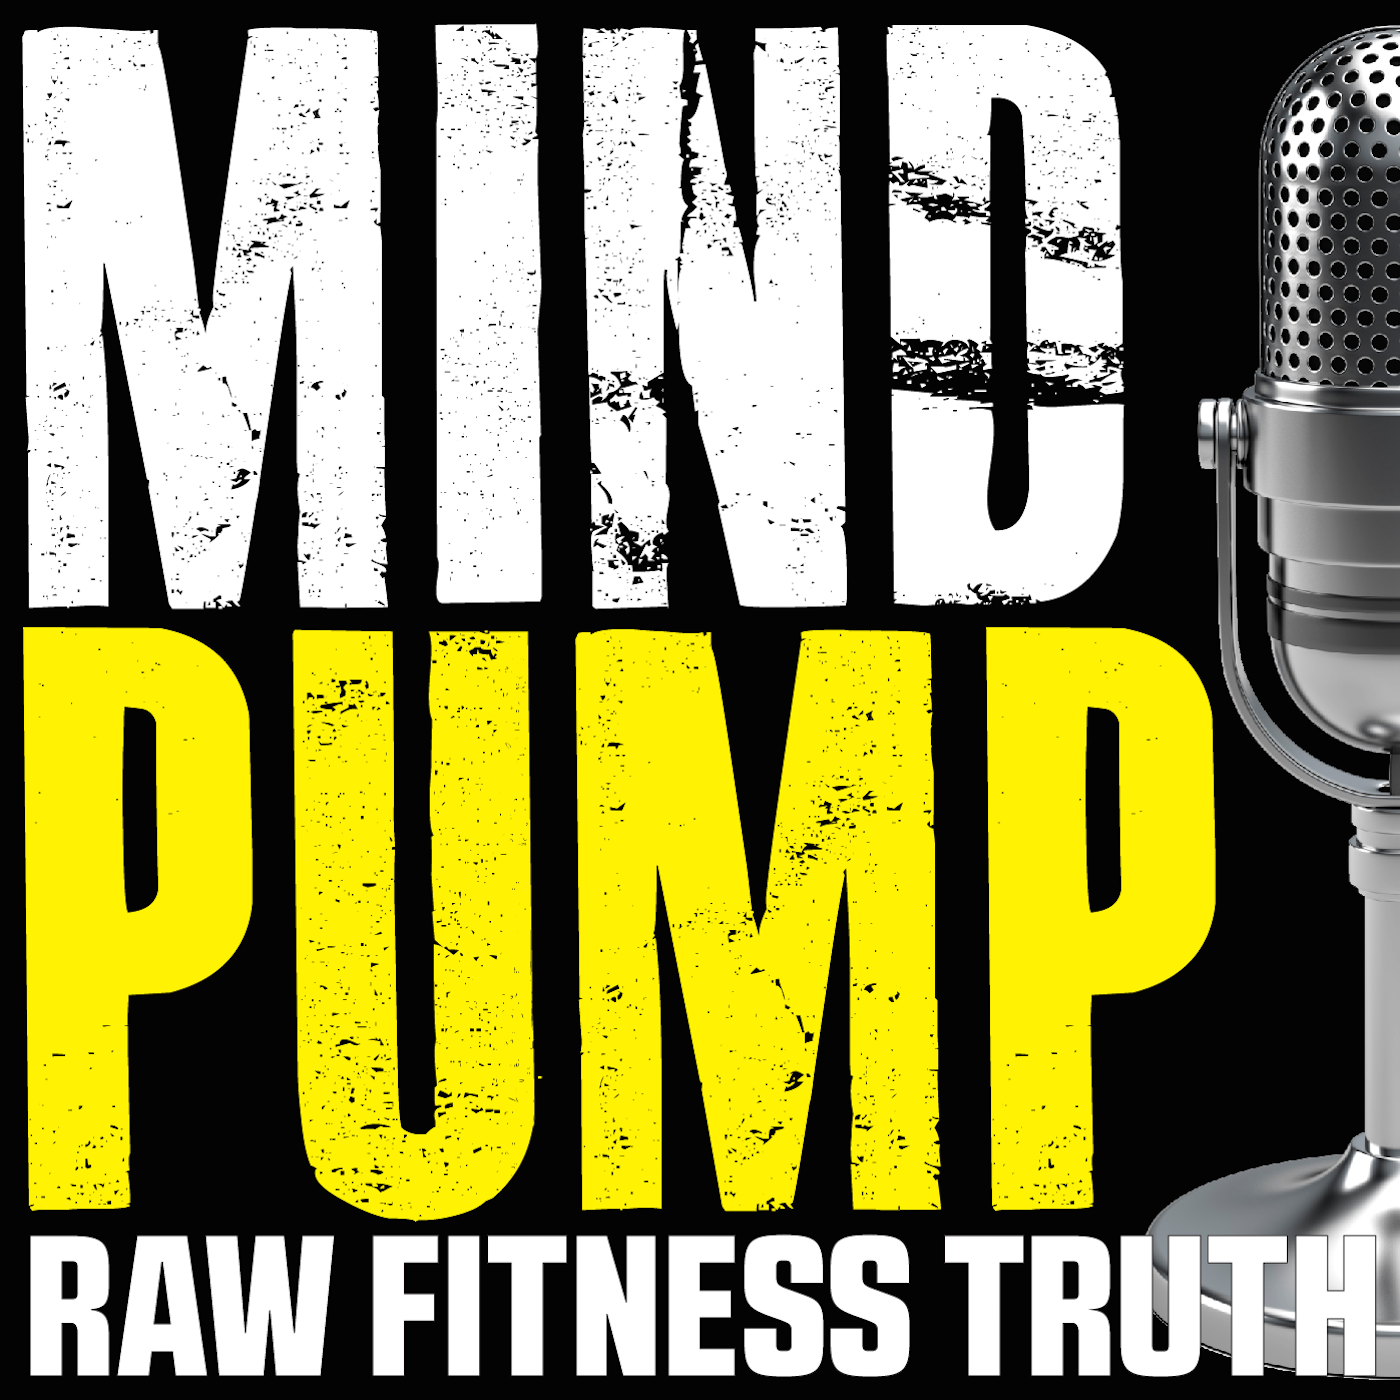 294: Protein & Kidney Stones, Cardio Frequency, Sleep Position & Posture & MORE